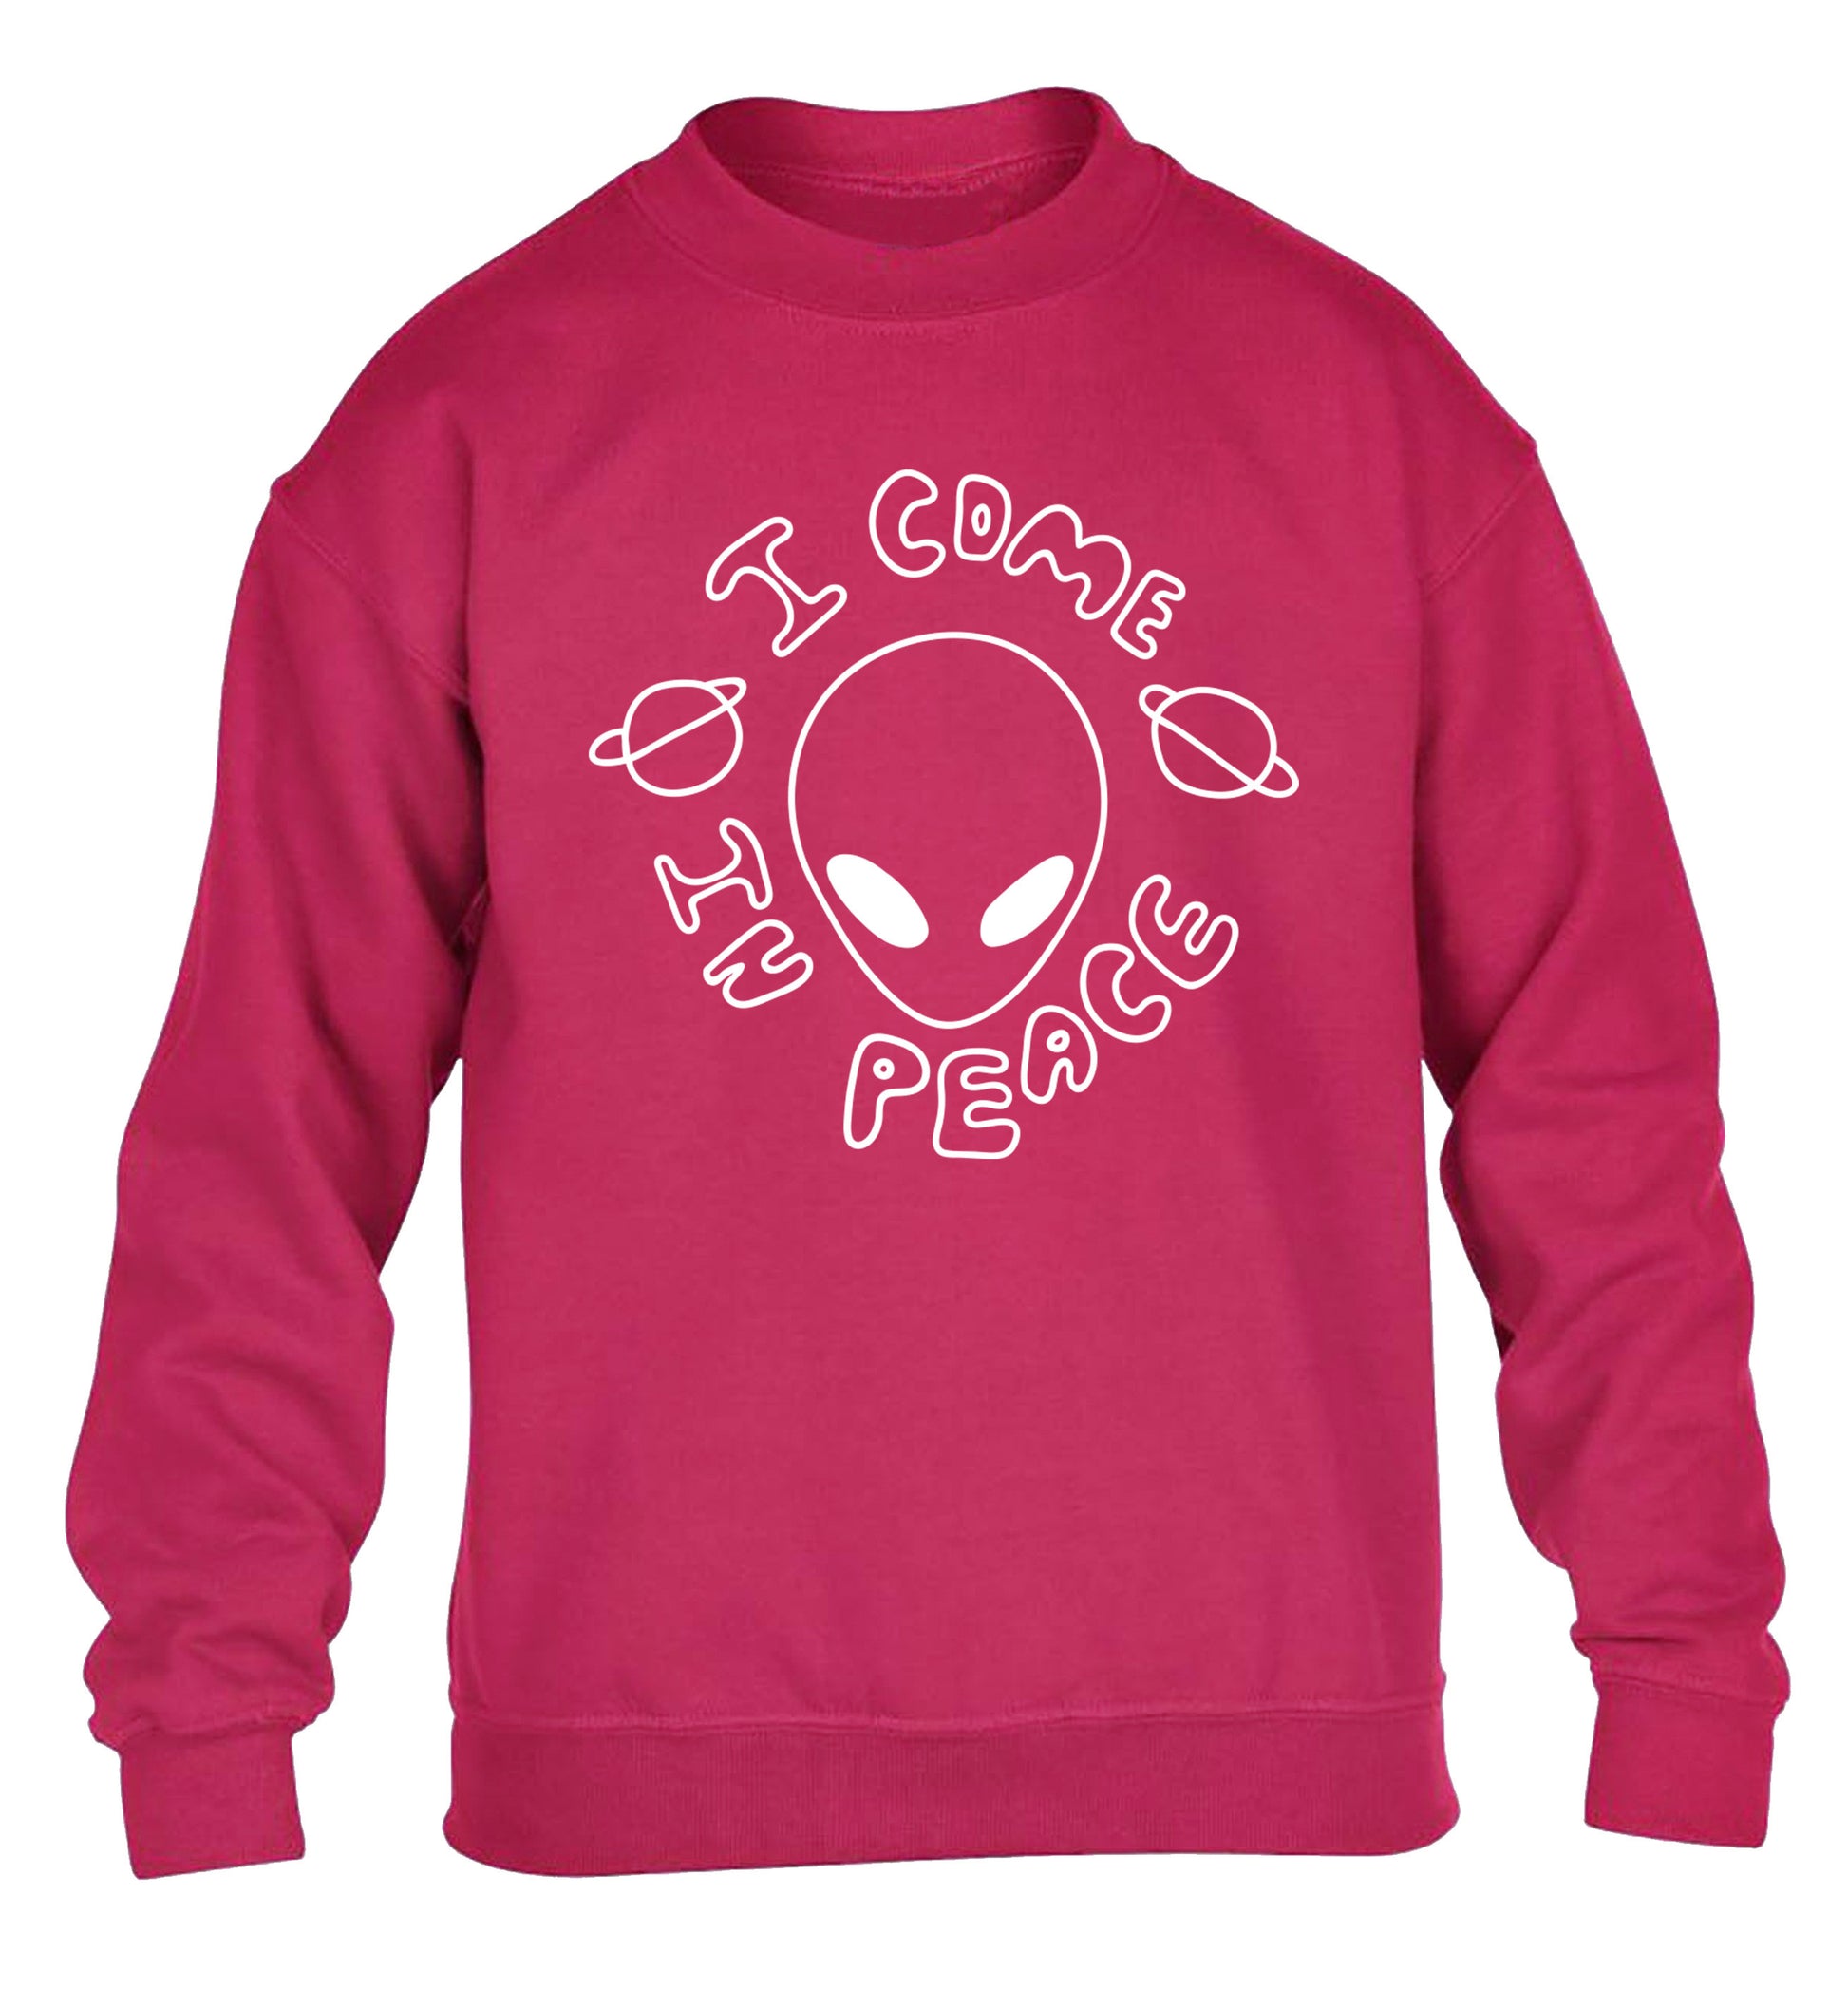 I come in peace children's pink sweater 12-14 Years